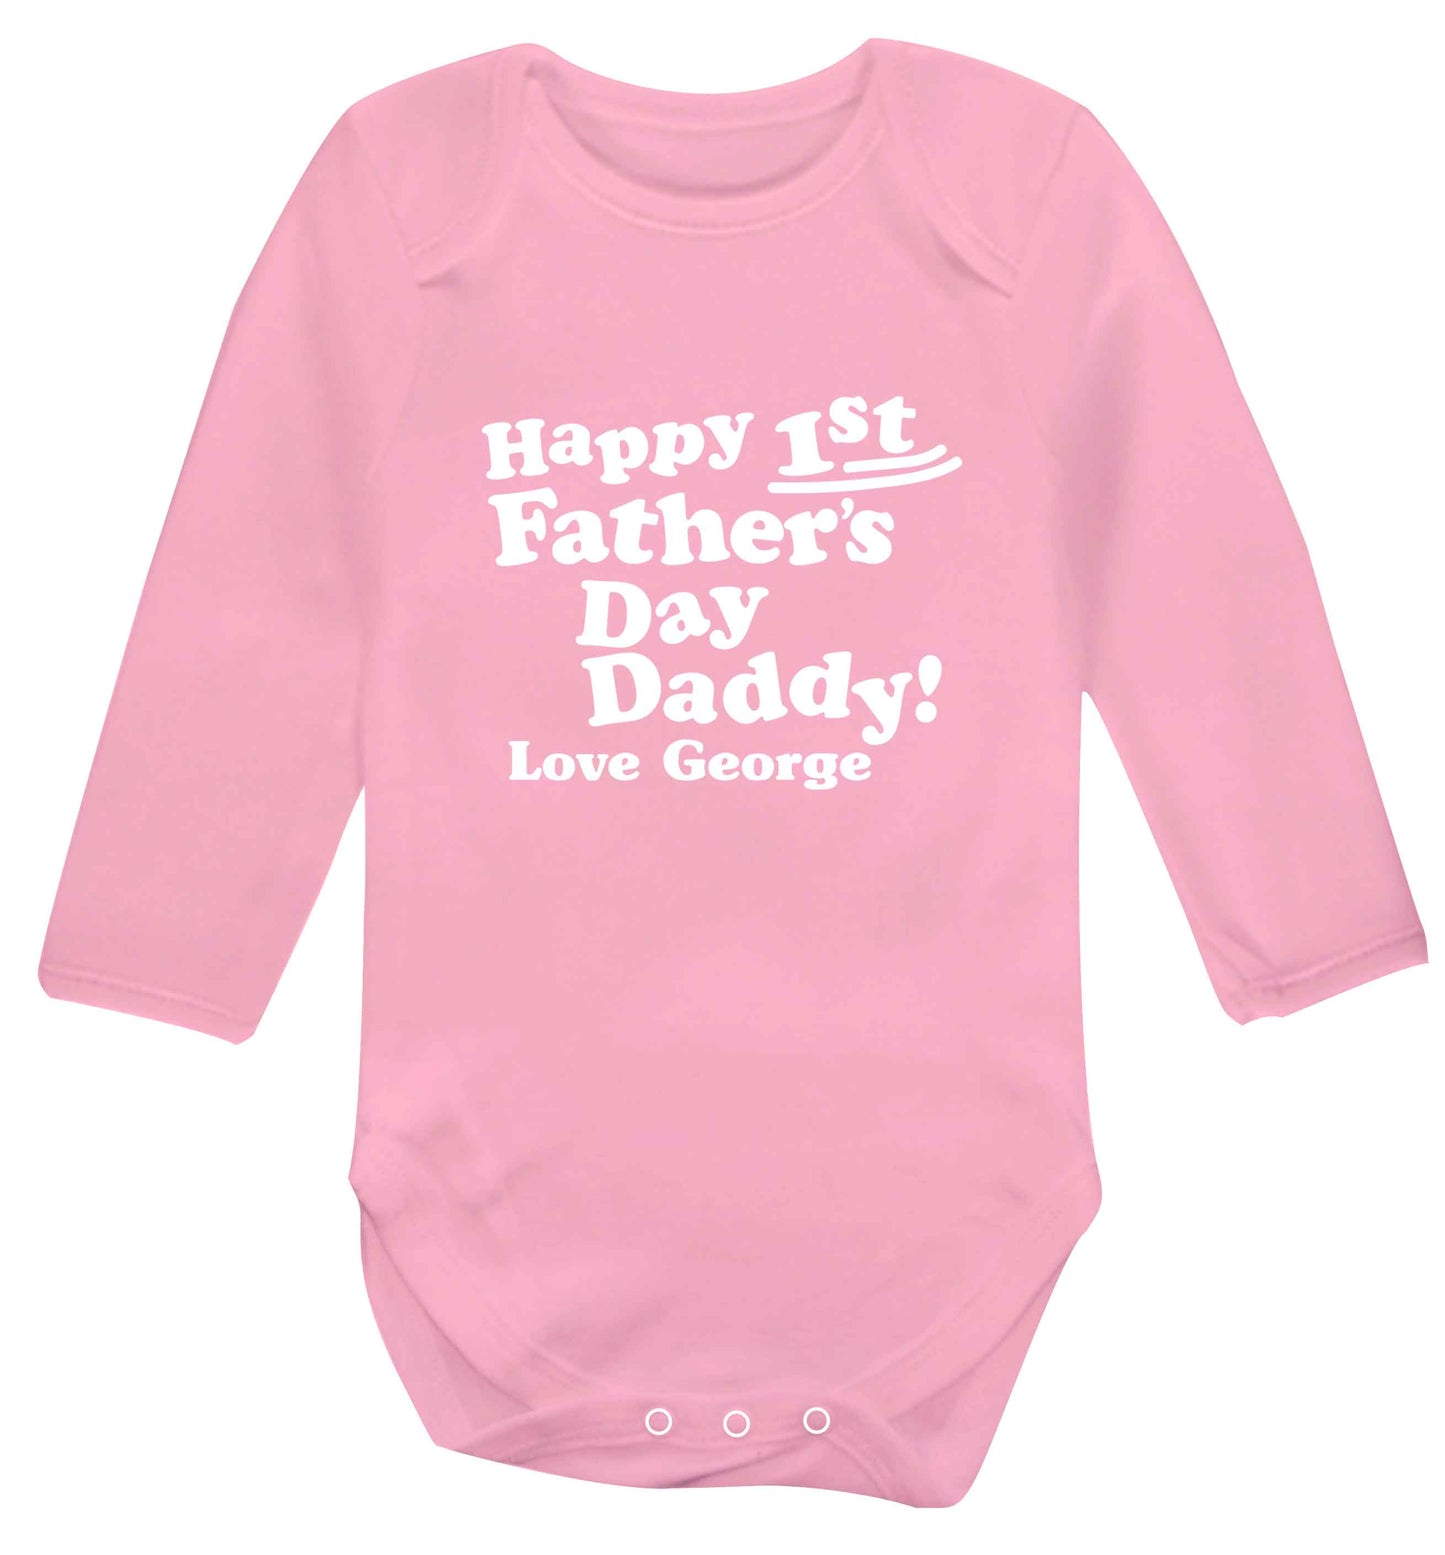 Happy first Fathers Day daddy love personalised baby vest long sleeved pale pink 6-12 months